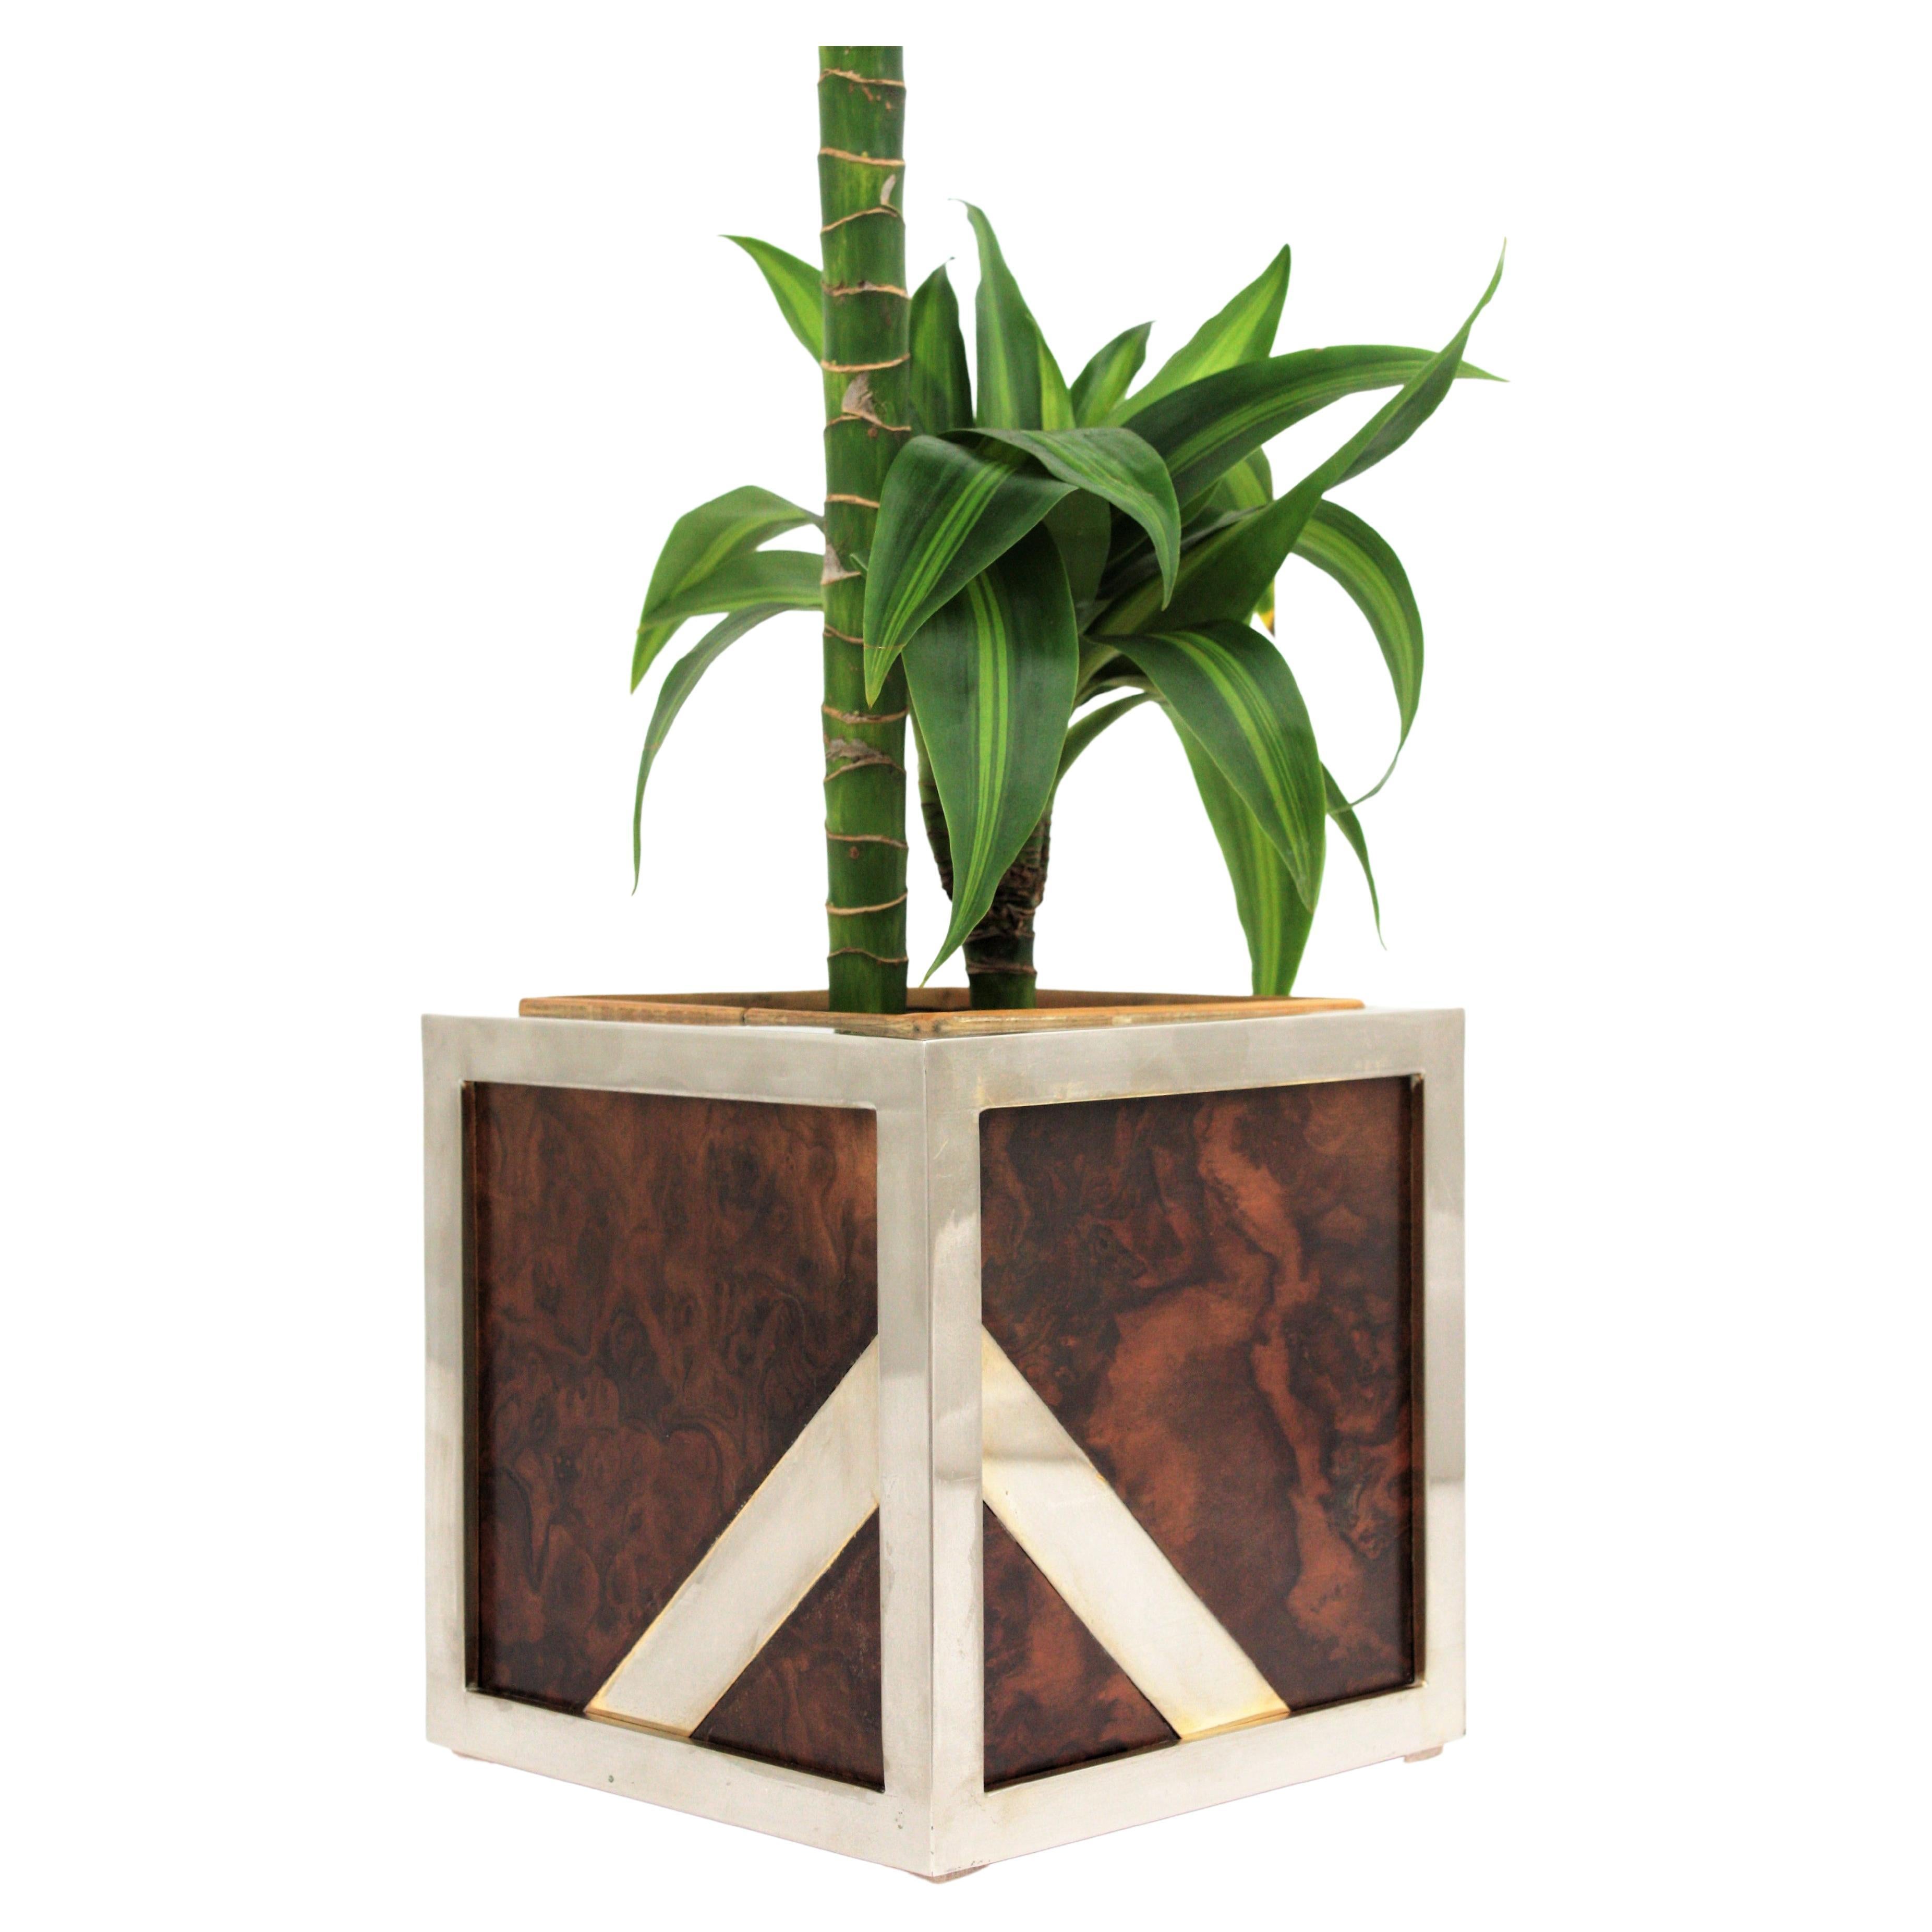 Cube Shaped Planter,  France, 1970s
Stylish geometric cube burl wood planter with corners and details in chromed steel. In the style of Maison Lancel home collection. 
Manufactured with walnut burl wood panels joined with chromed steel details. 
In